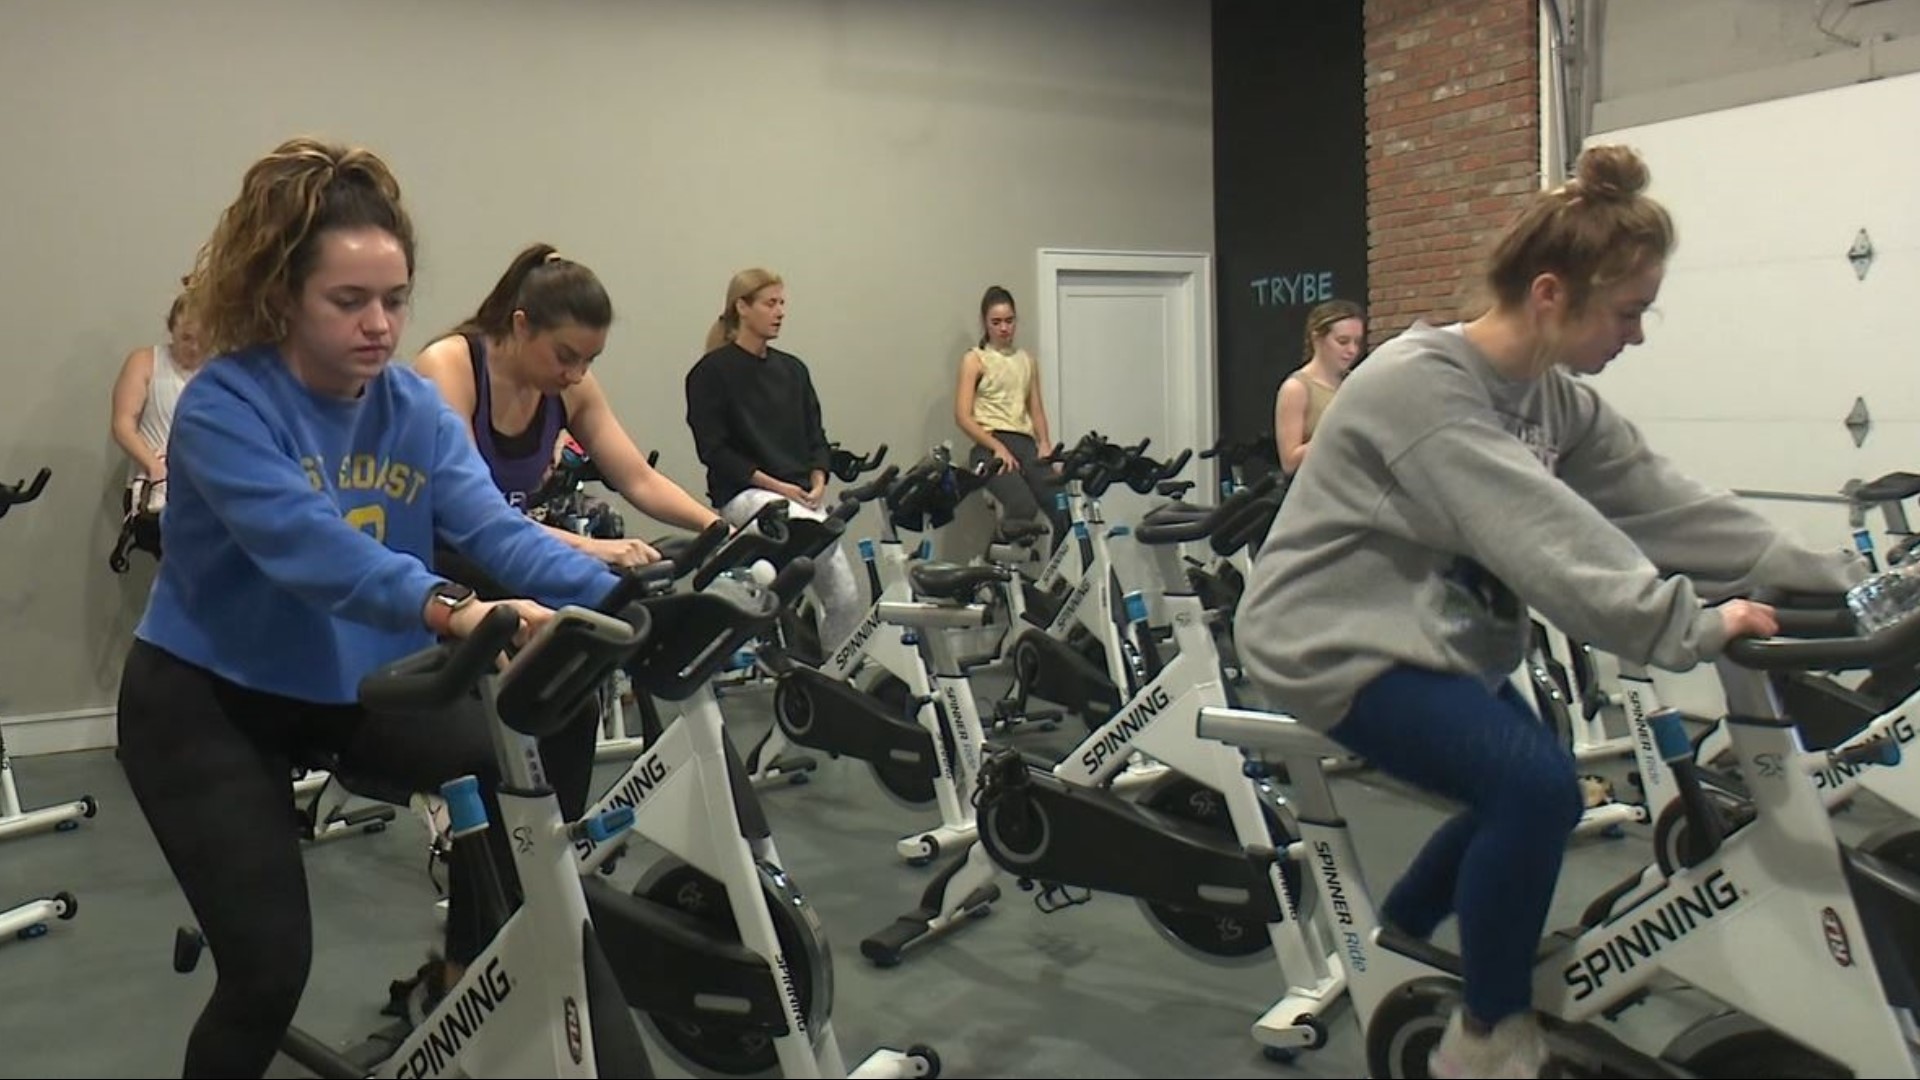 New year, new you? Gyms are welcoming new members this week. Newswatch 16's Elizabeth Worthington got some tips for sticking to those resolutions at a Scranton gym.